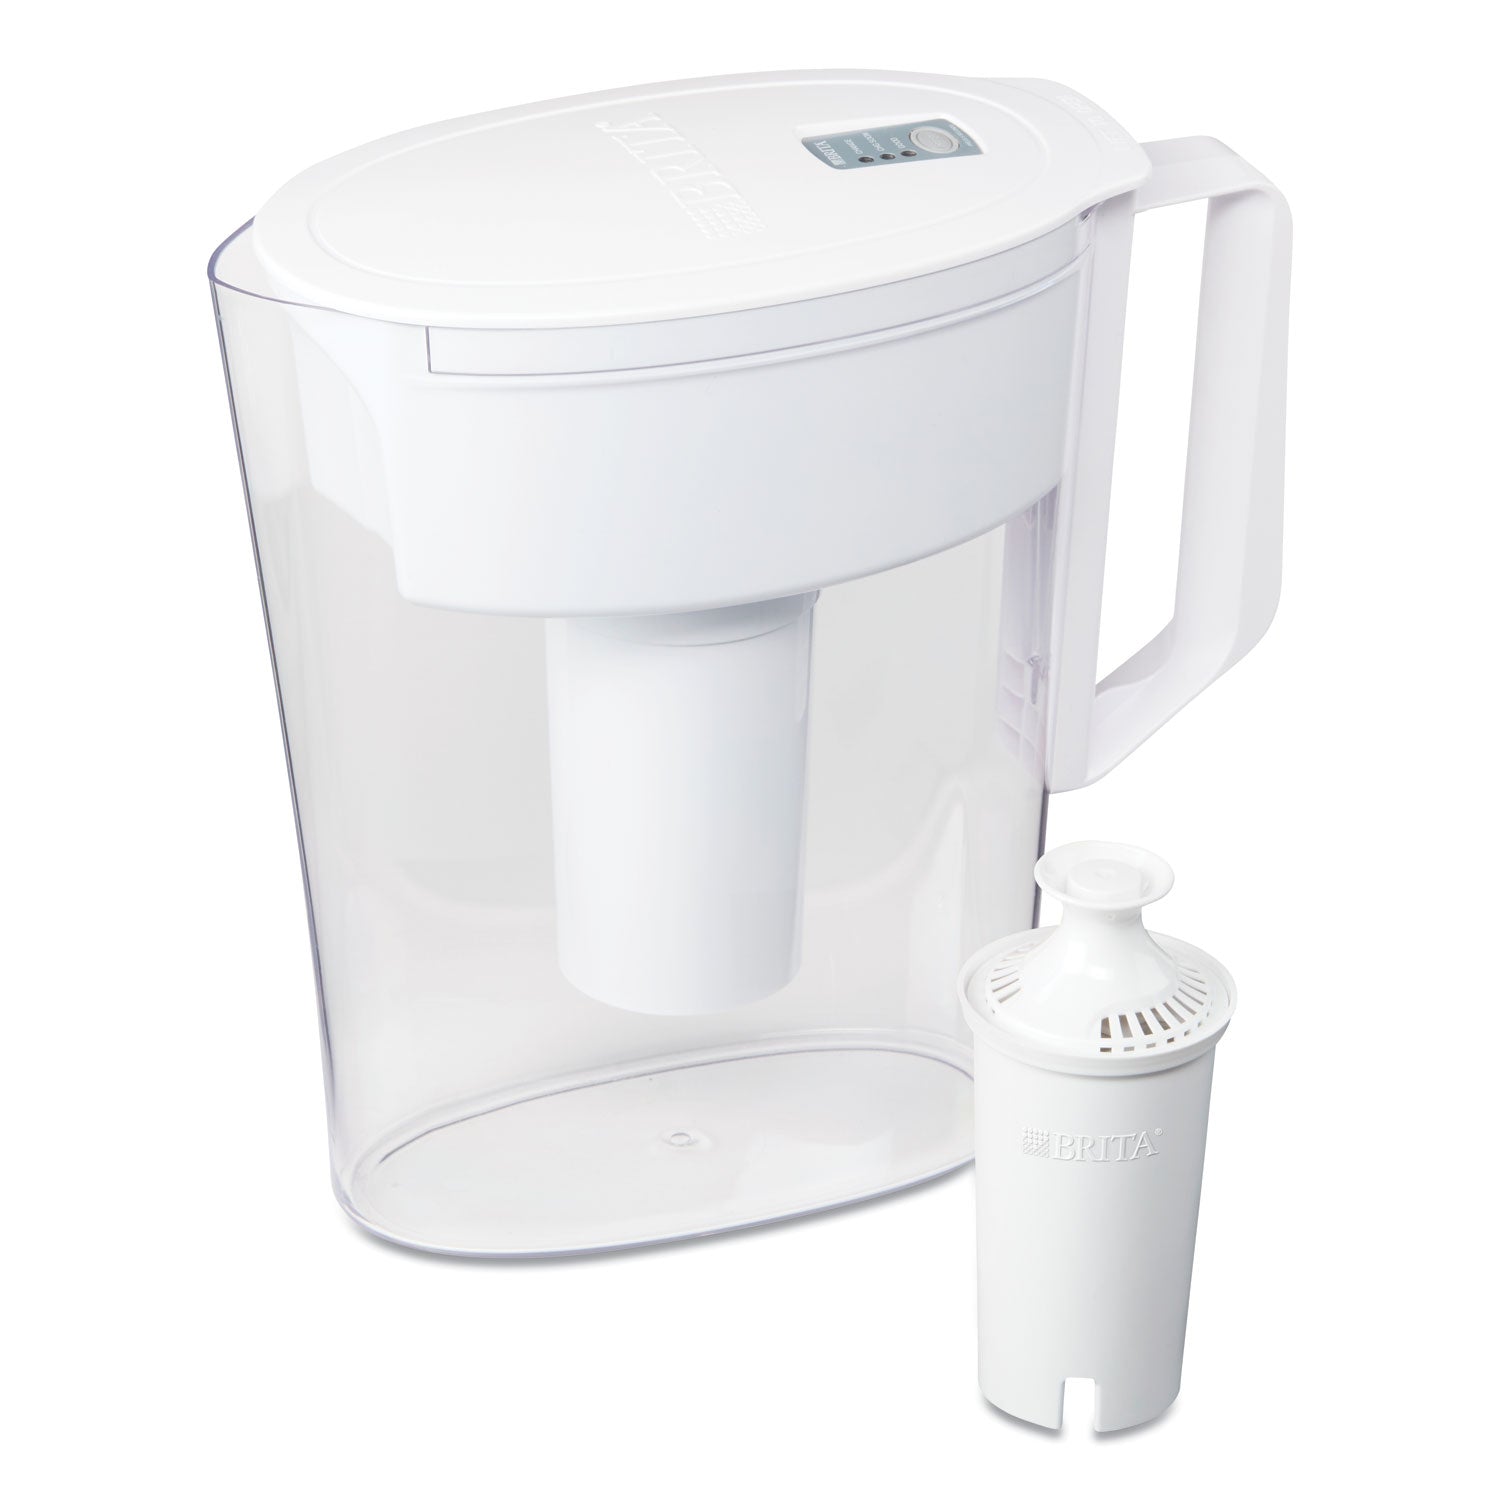 classic-water-filter-pitcher-40-oz-5-cups-clear-2-carton_clo36089 - 1